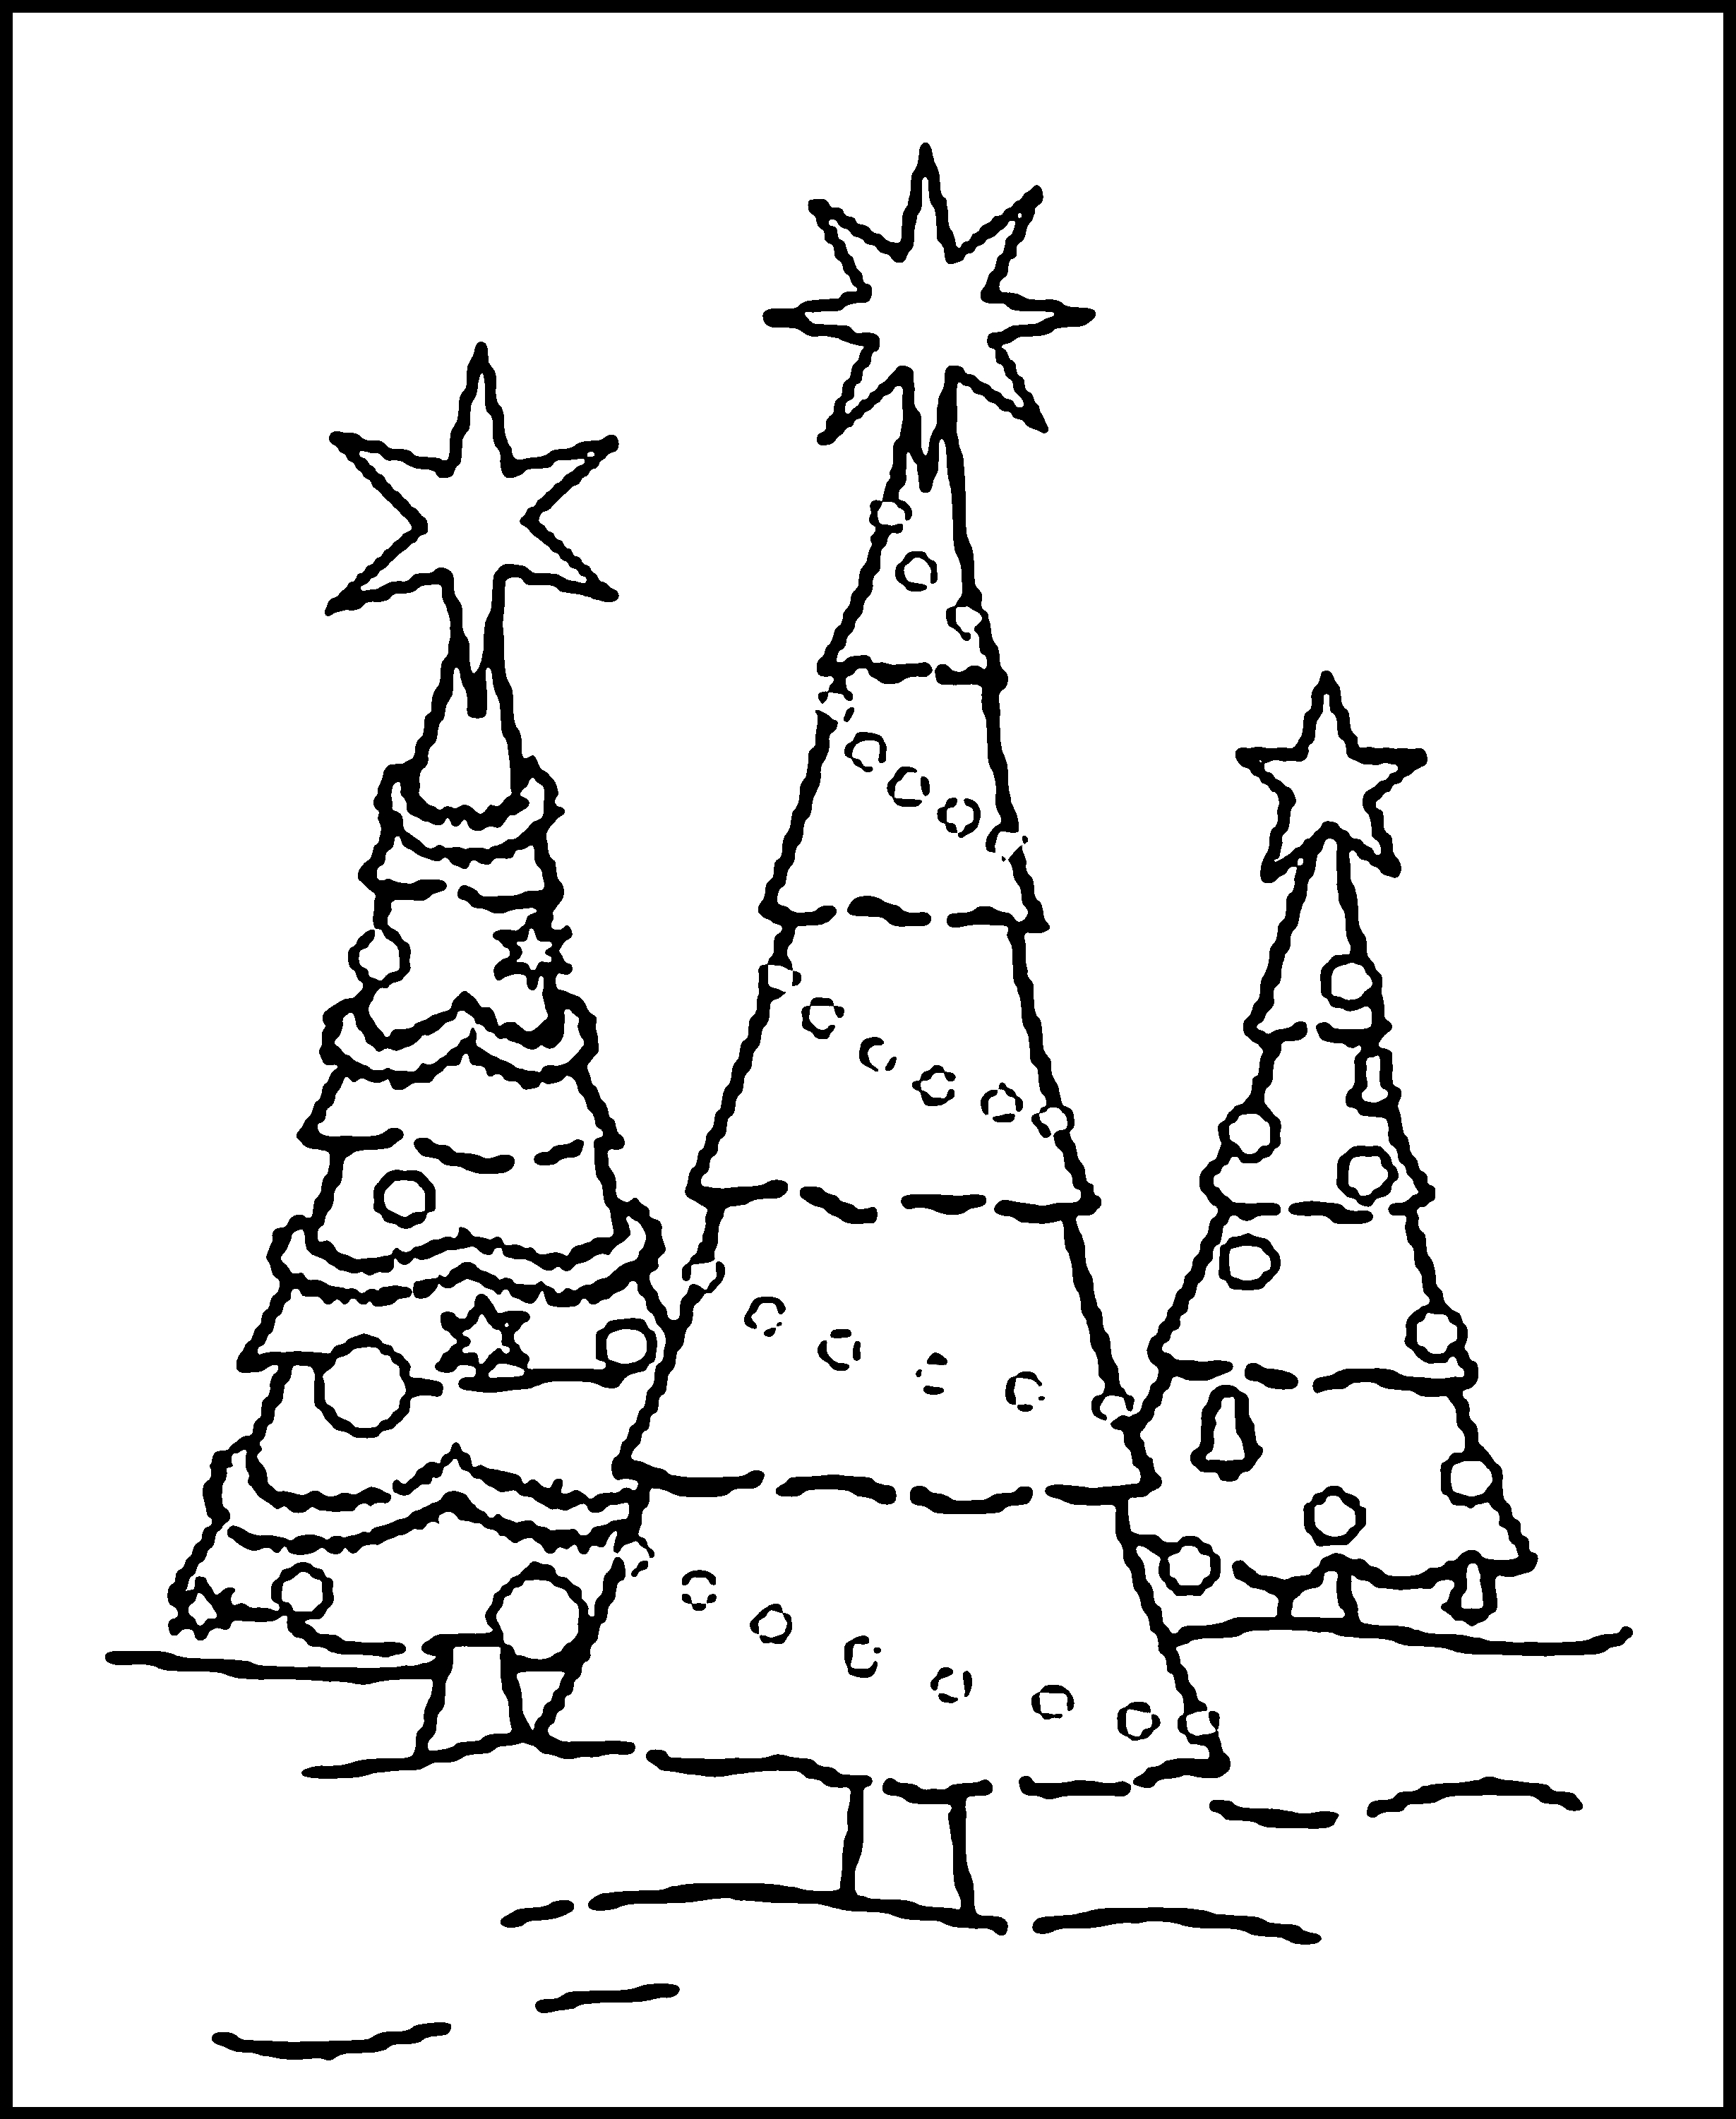 Free Printable Christmas Tree Coloring Pages For Kids - Free Printable Christmas Tree Ornaments Coloring Pages